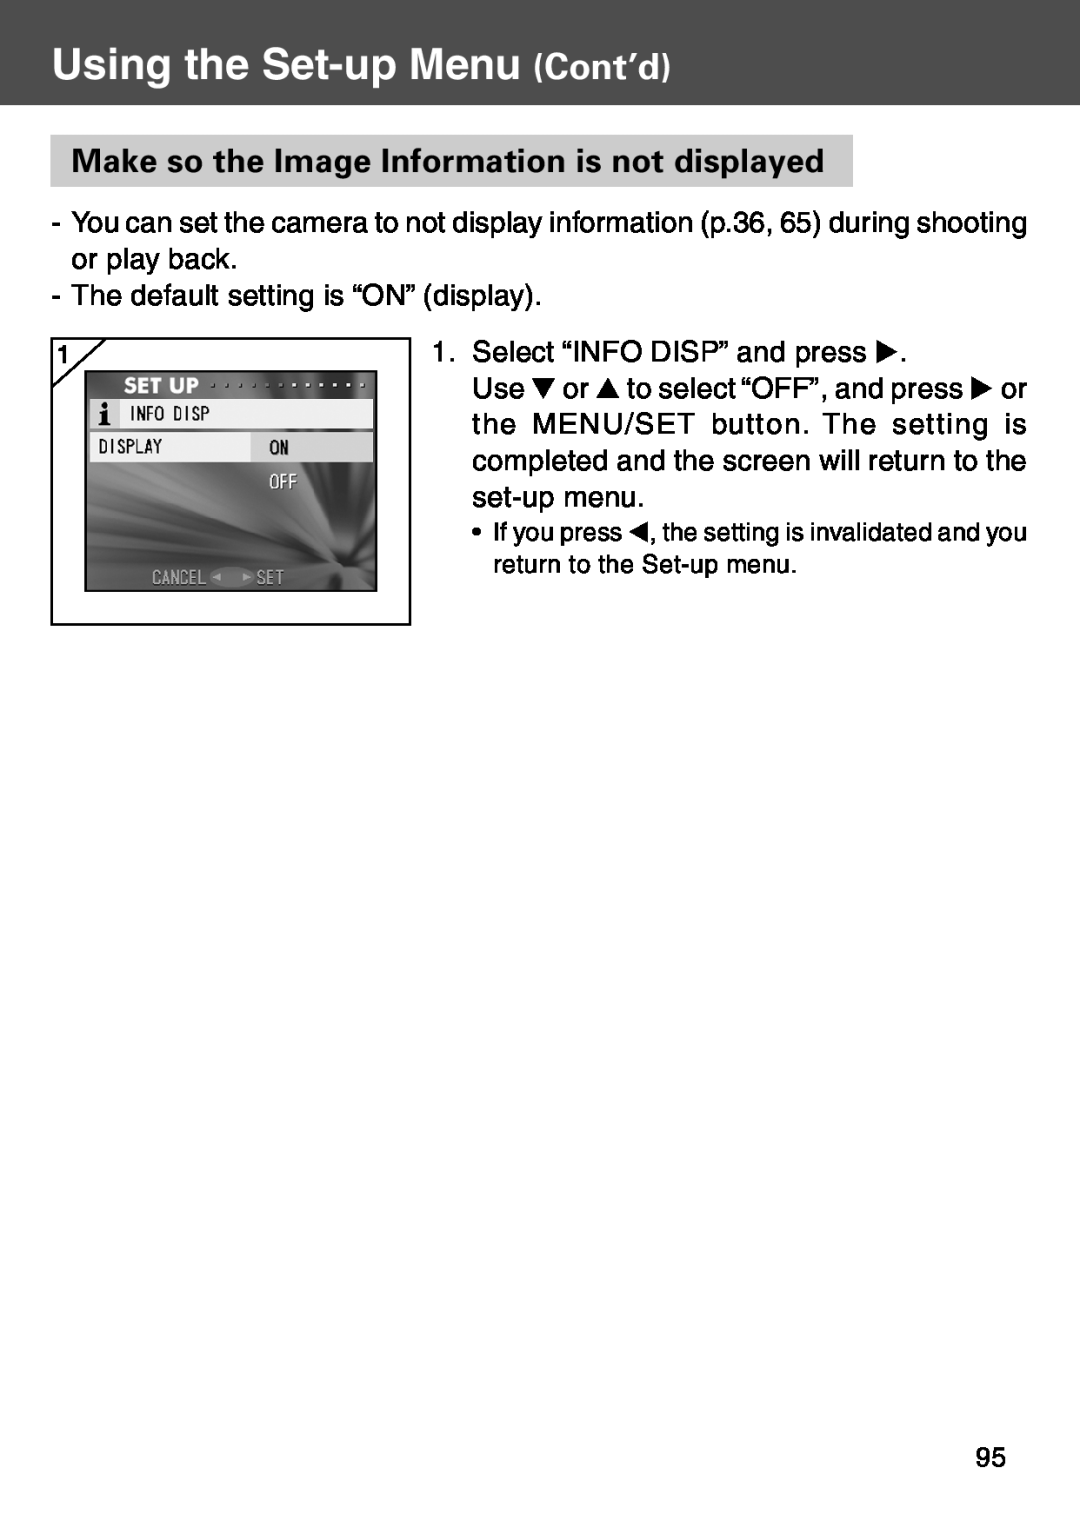 Konica Minolta KD-500Z user manual Make so the Image Information is not displayed, Using the Set-up Menu Cont’d 